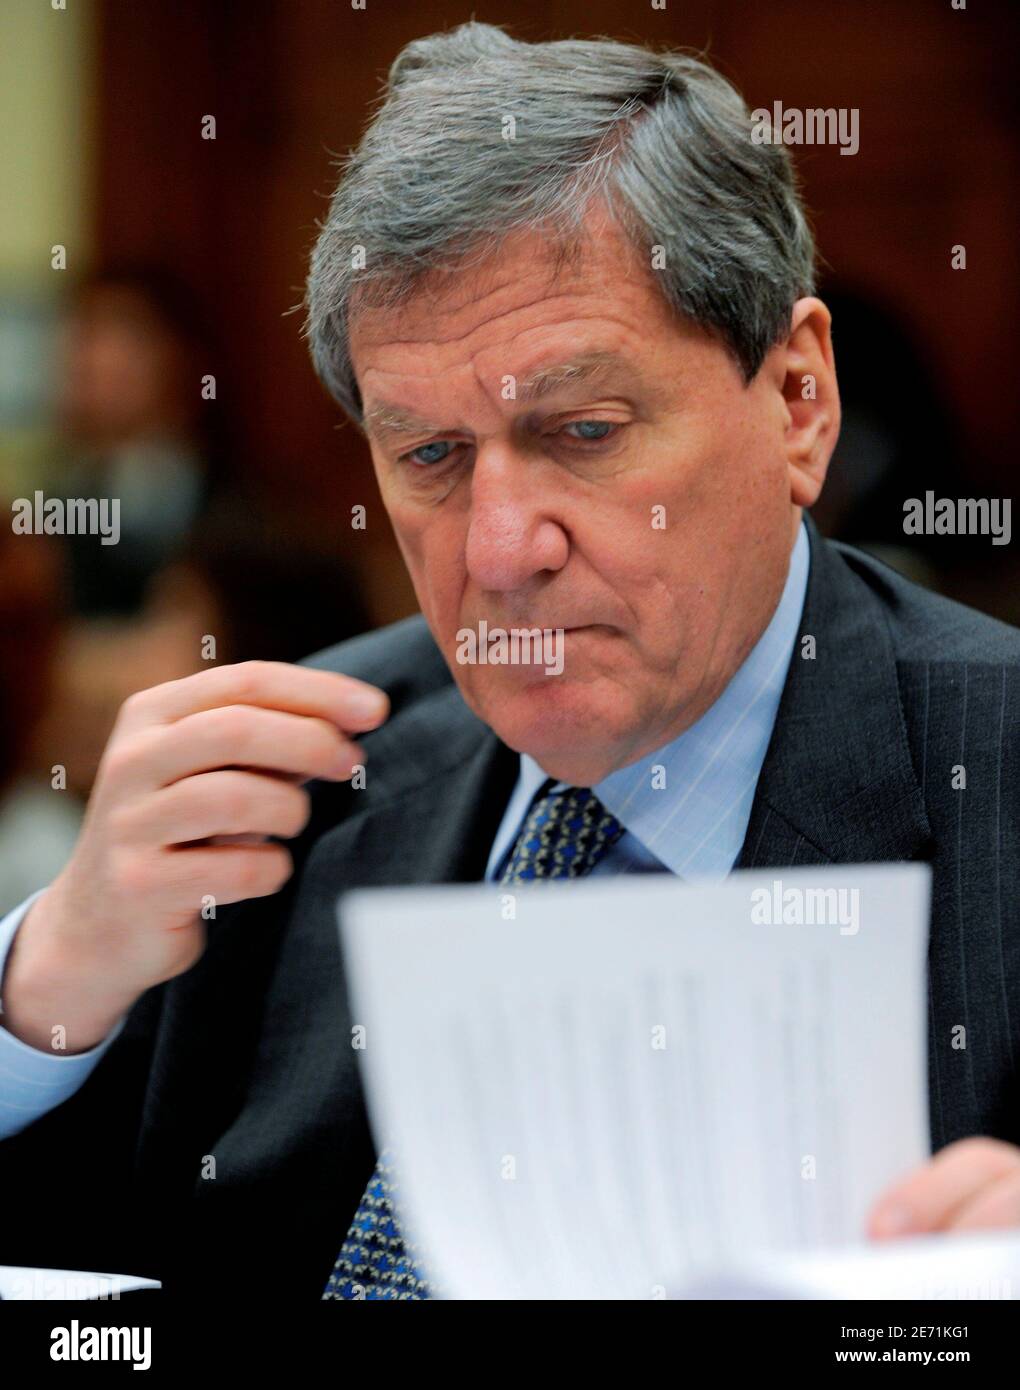 U.S. Special Representative for Afghanistan and Pakistan Richard Holbrooke looks at his notes as he prepares to testify before a House Foreign Affairs Committee hearing on 'The Future of the US-Pakistan Relationship', on Capitol Hill in Washington, May 5, 2009. The panel questioned Holbrooke on recent territorial gains by the Taliban in western Pakistan.         REUTERS/Mike Theiler   (UNITED STATES POLITICS CONFLICT IMAGES OF THE DAY) Stock Photo